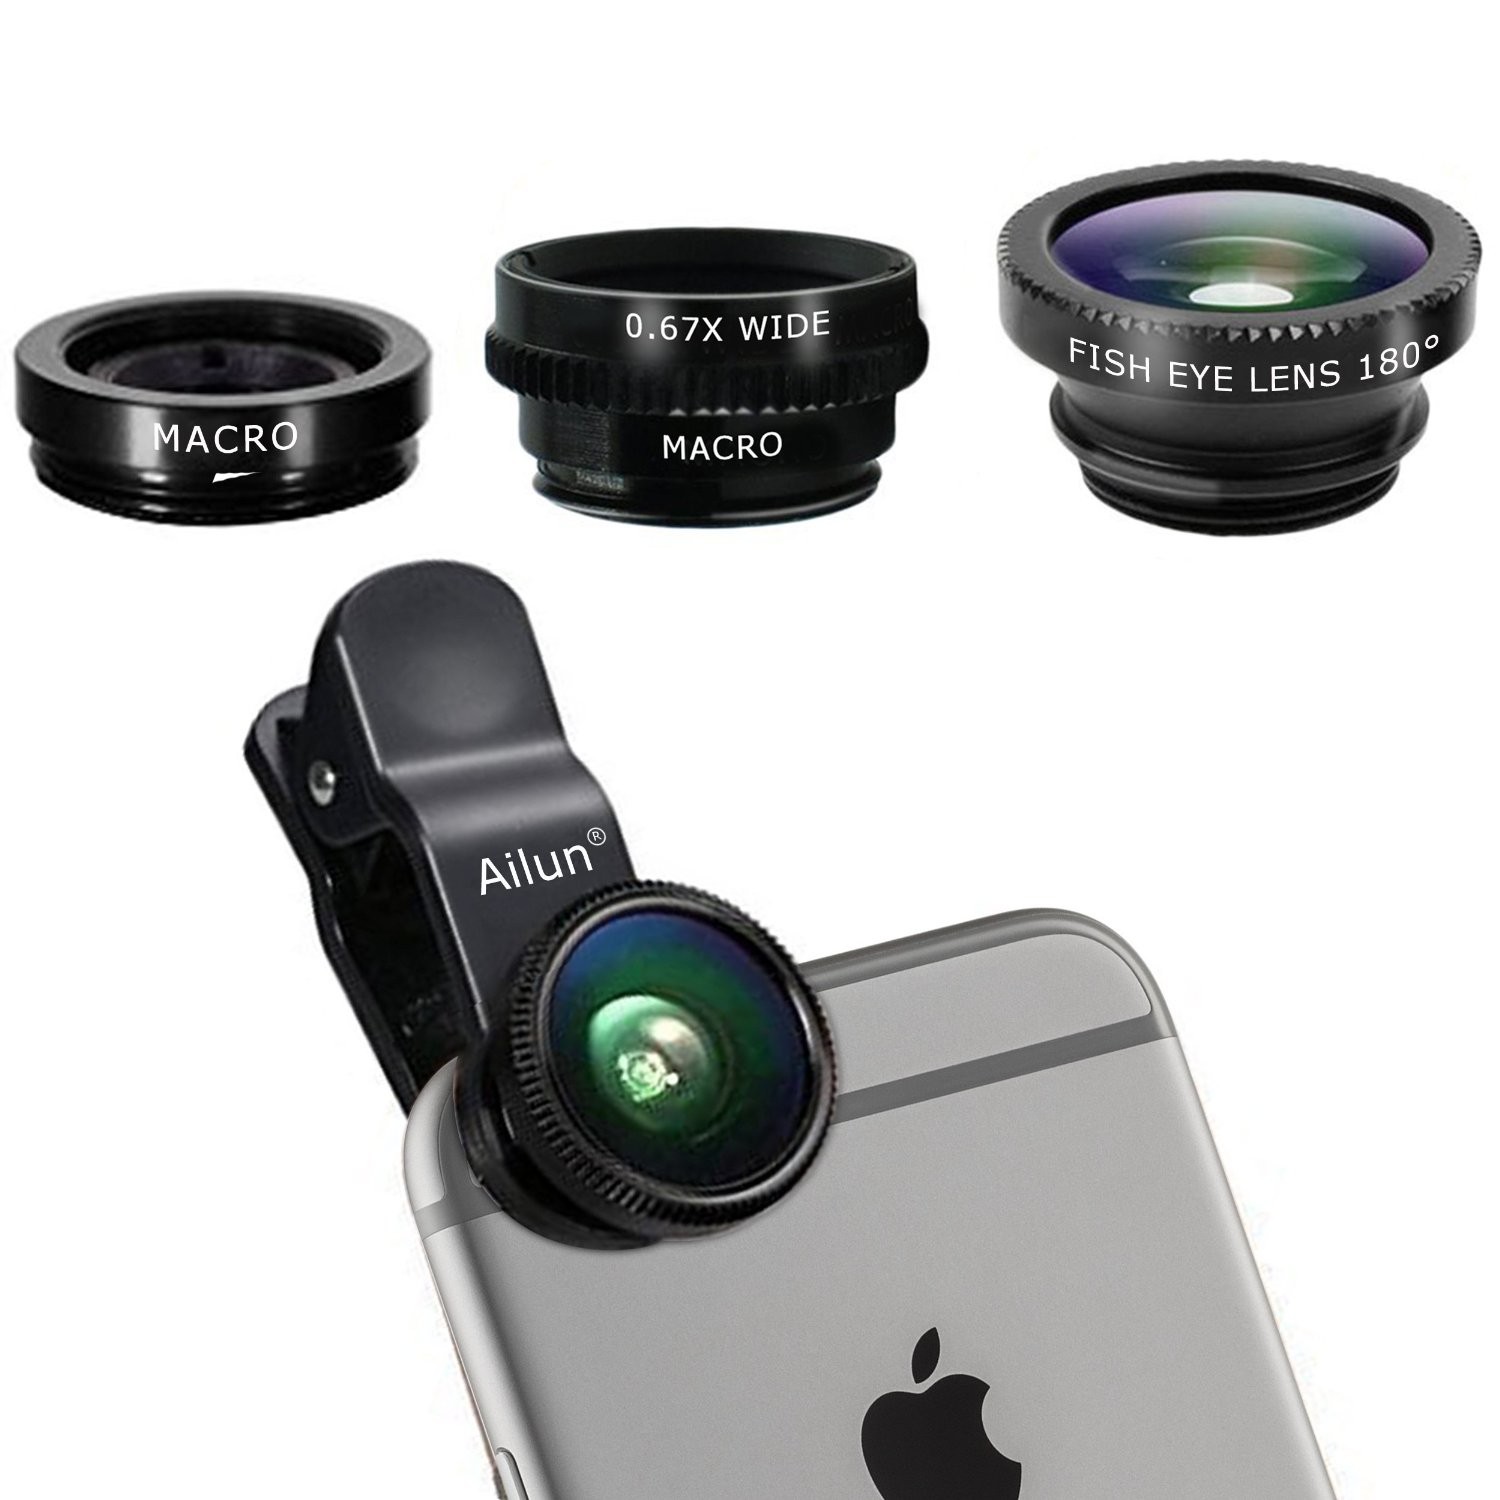 iPhone lens kits for under $10 | iMore